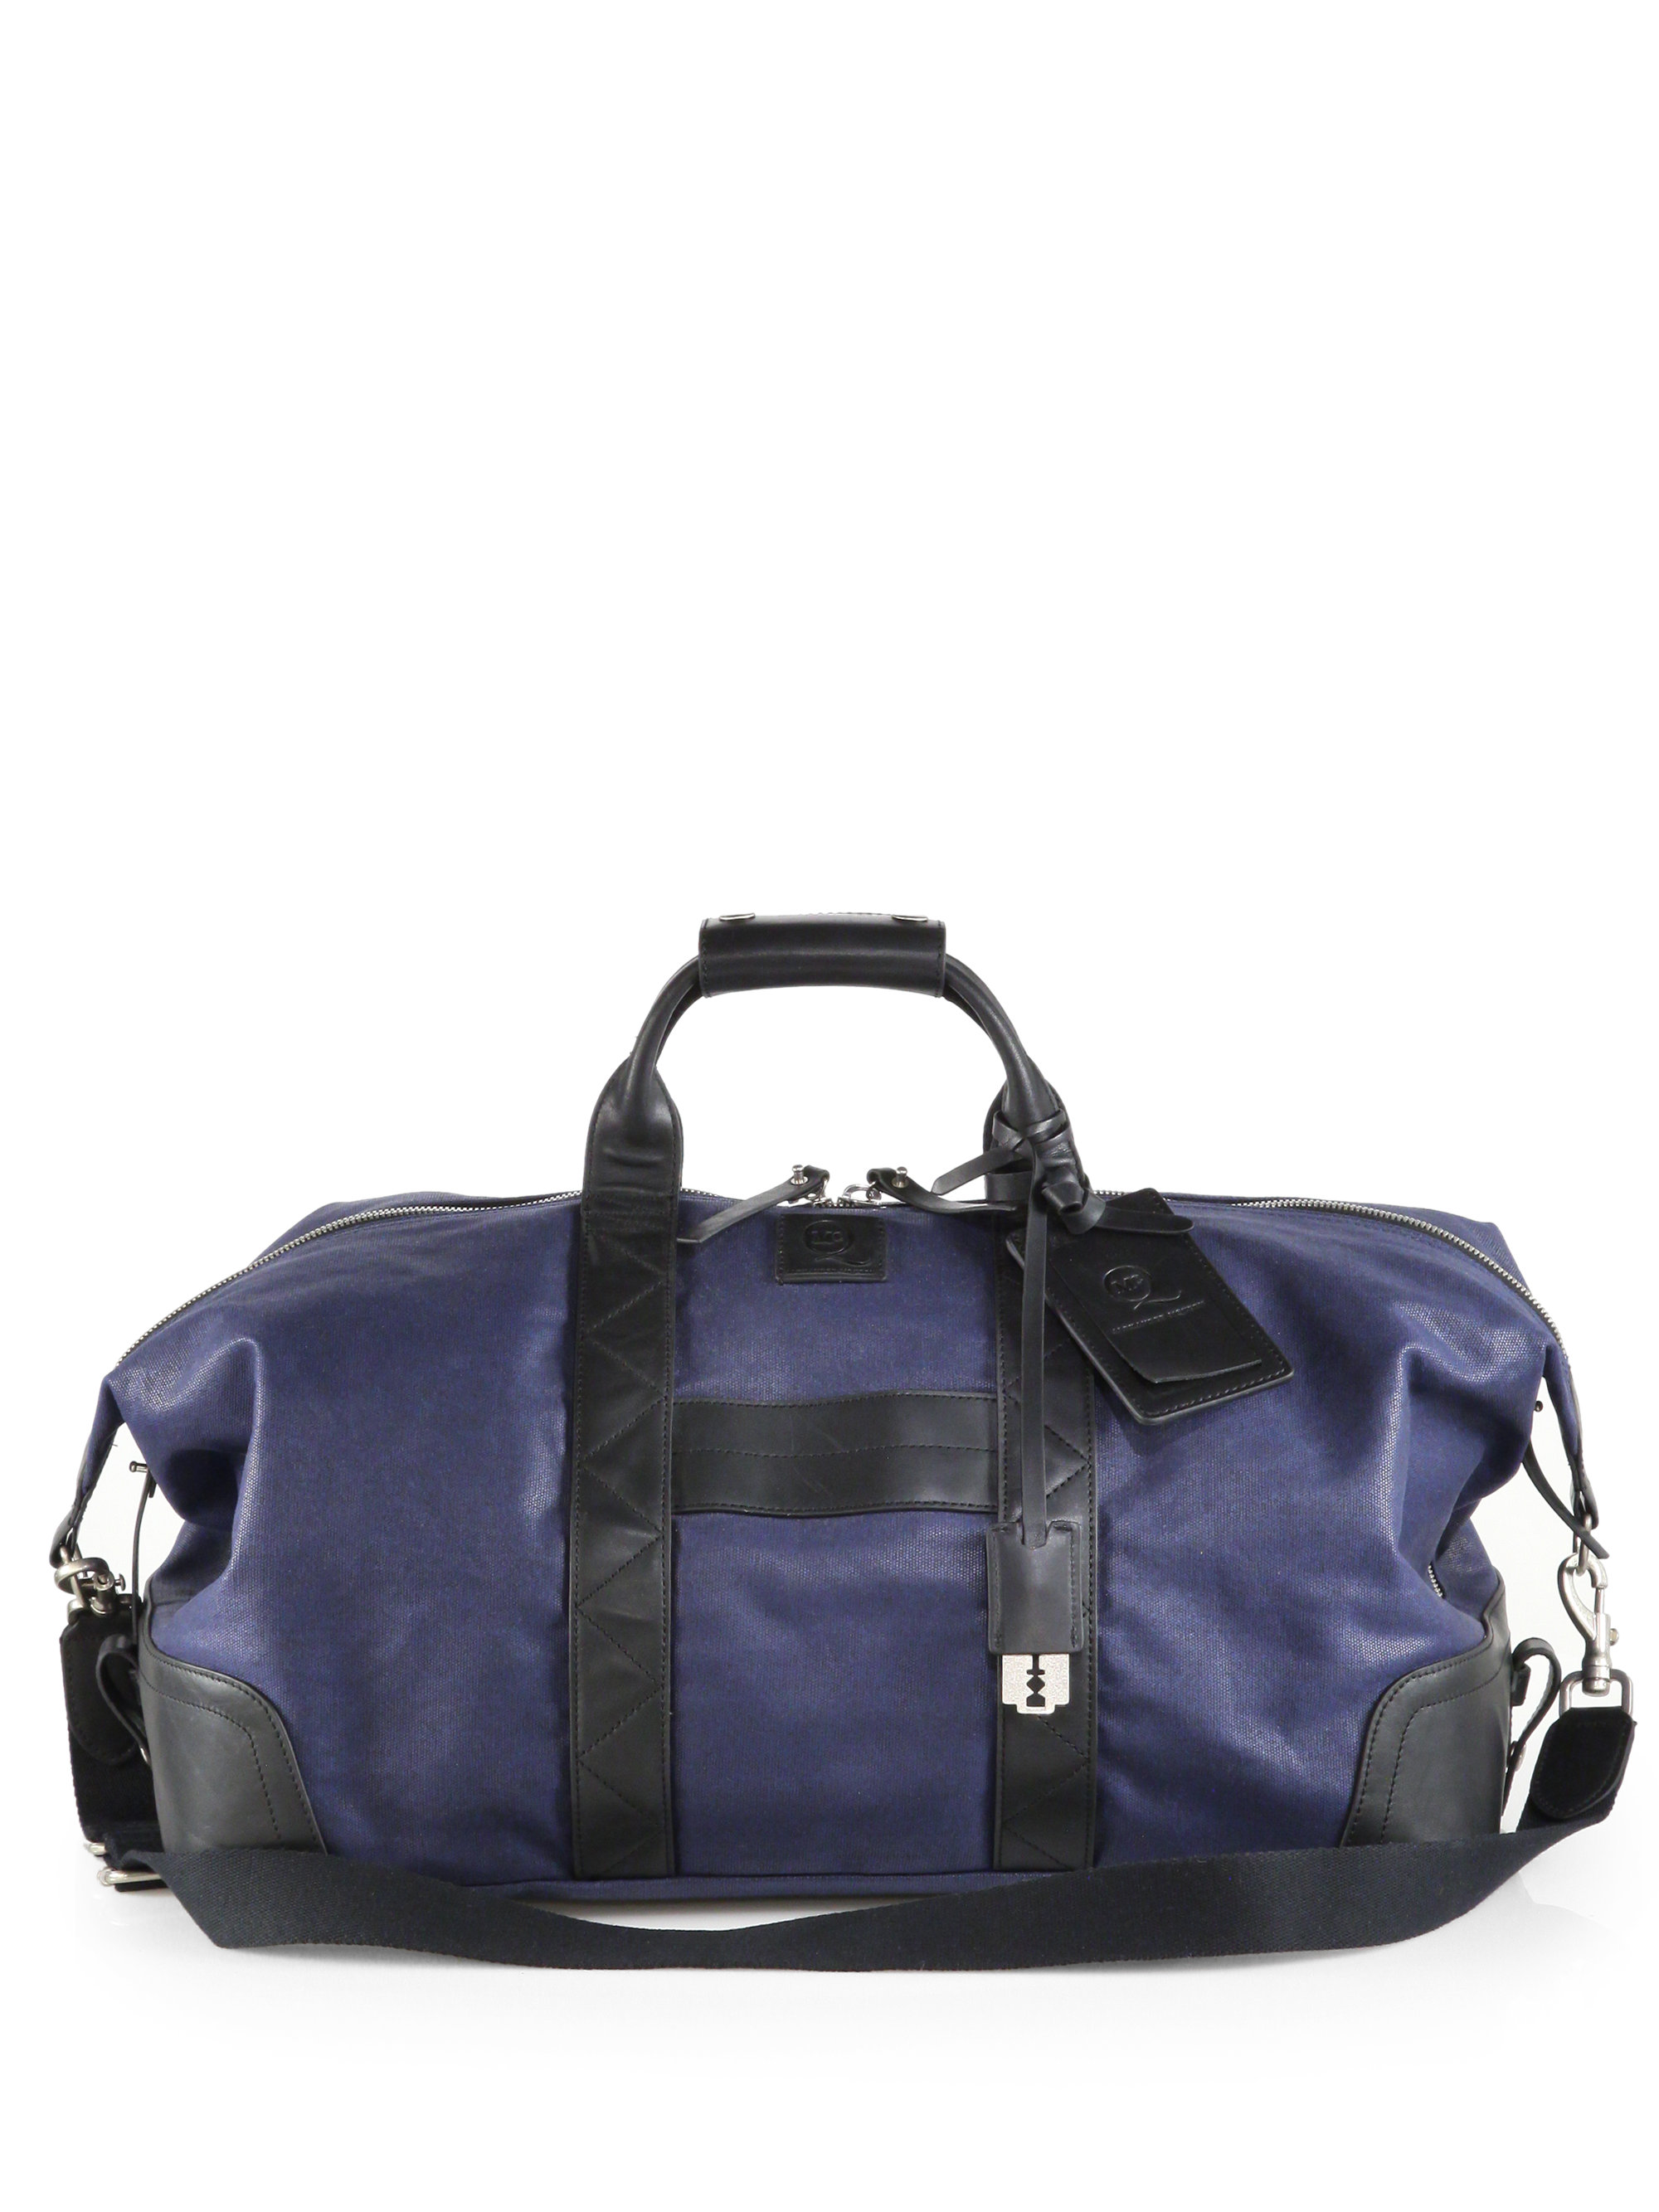 Lyst - Mcq Canvas Weekender Duffle Bag in Blue for Men